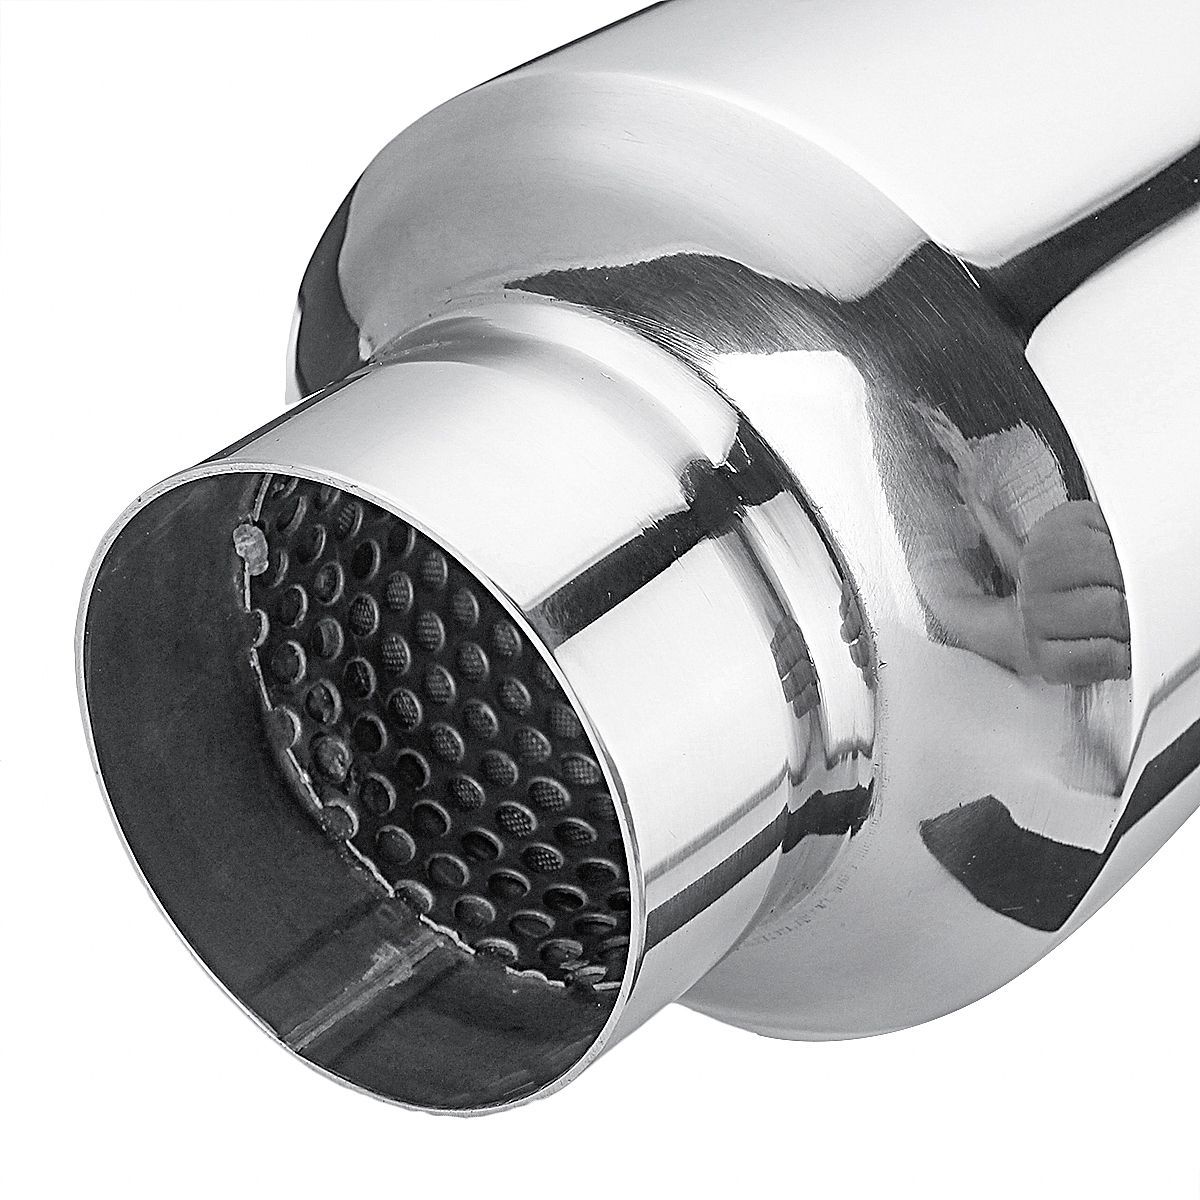 Universal-Turbine-Exhaust-Muffler-Resonator-304-Stainless-Steel-25-Inch-Inlet-25-Inch-Outlet-1436400